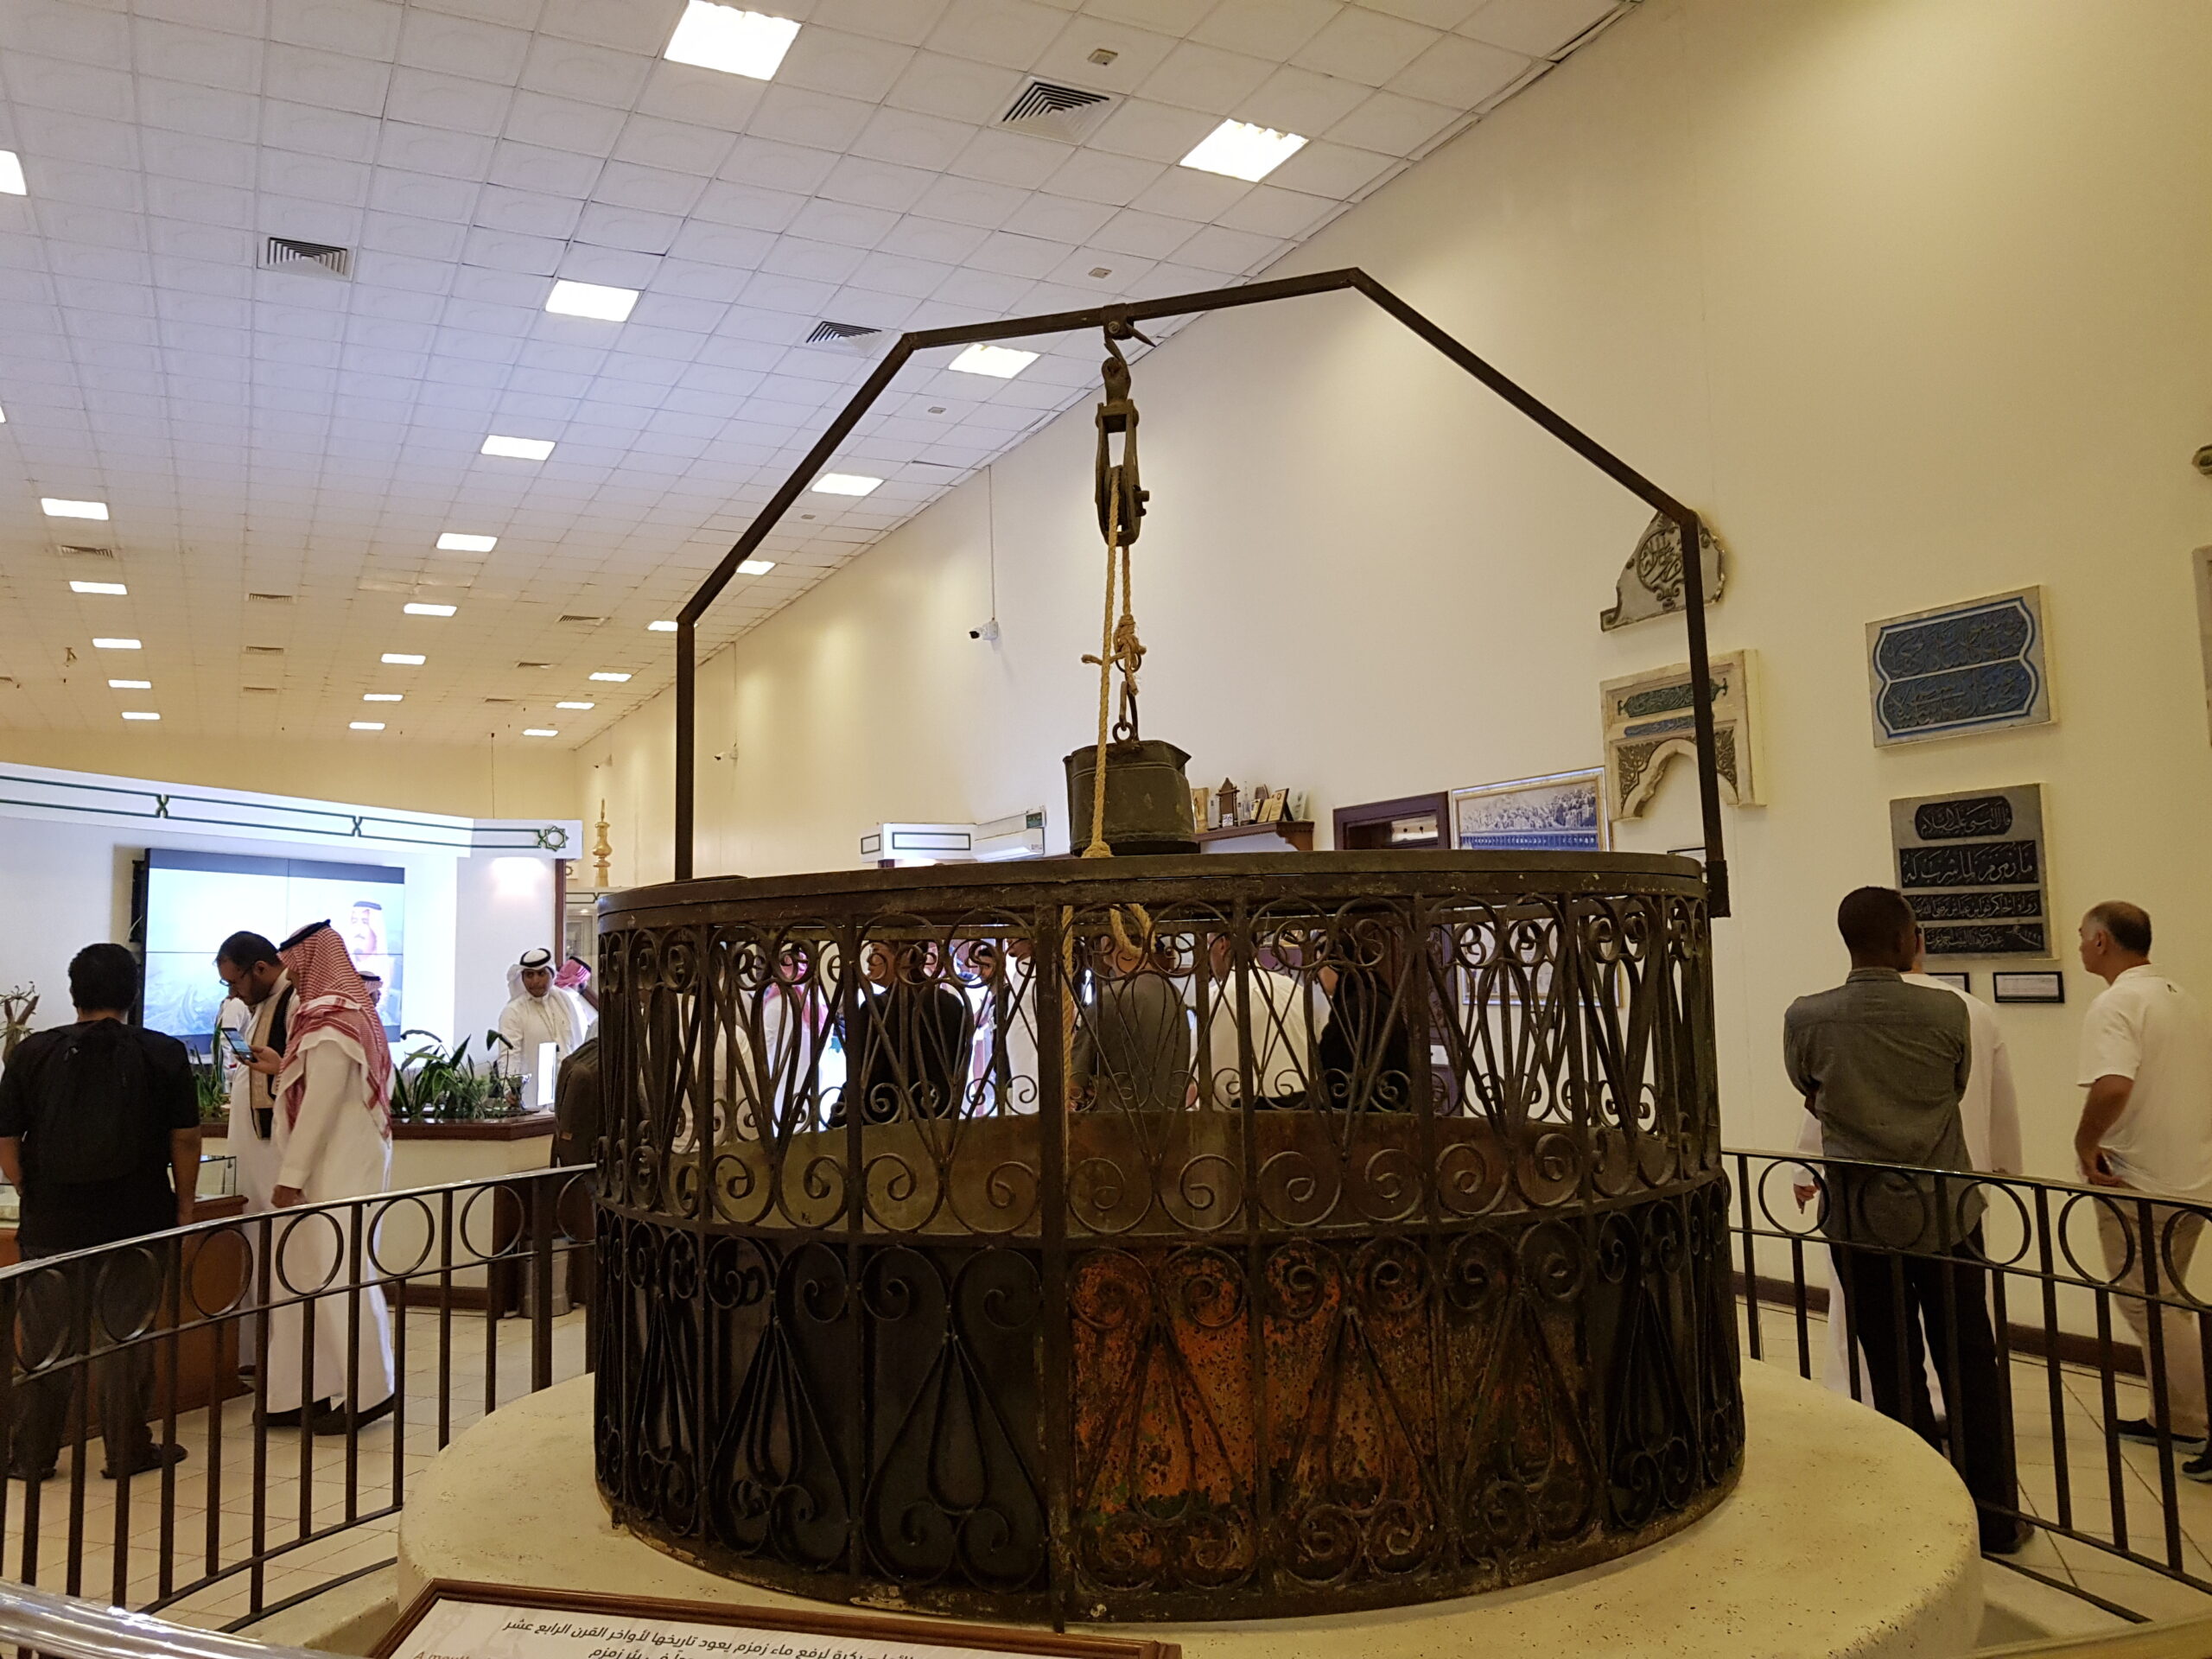 Zamzam well never dries for 5,000 years